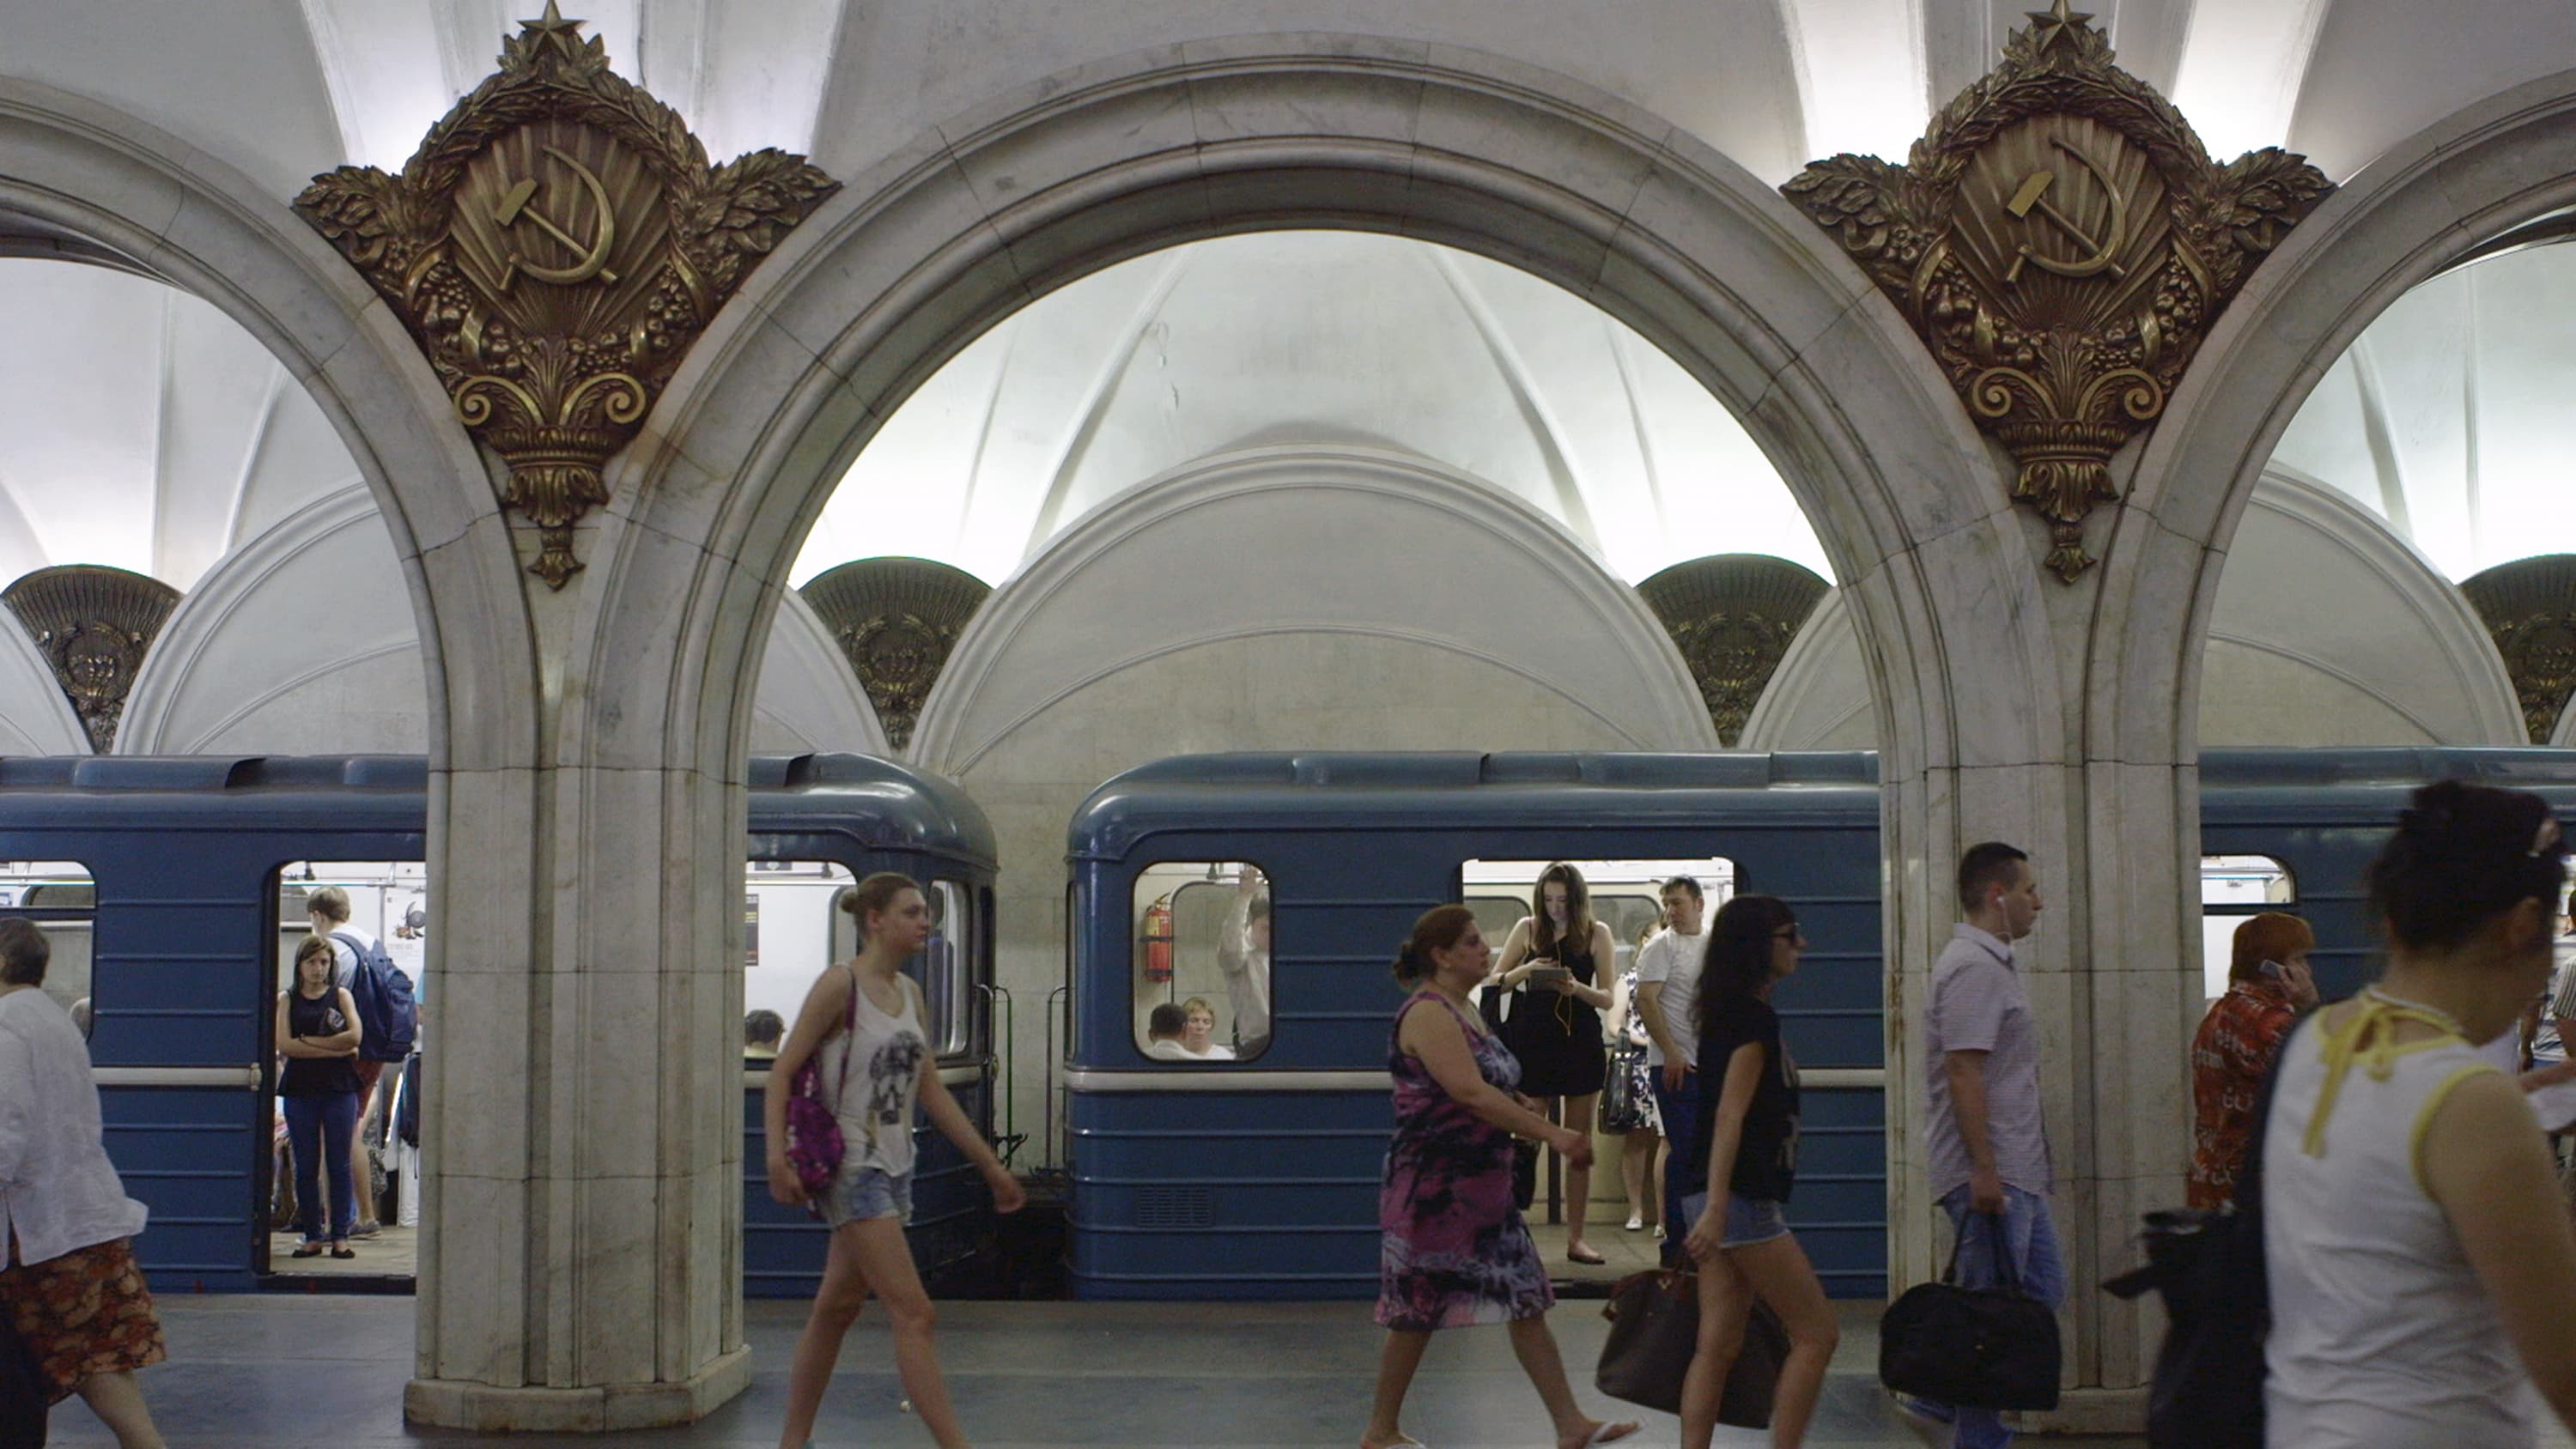 How we built the Moscow metro